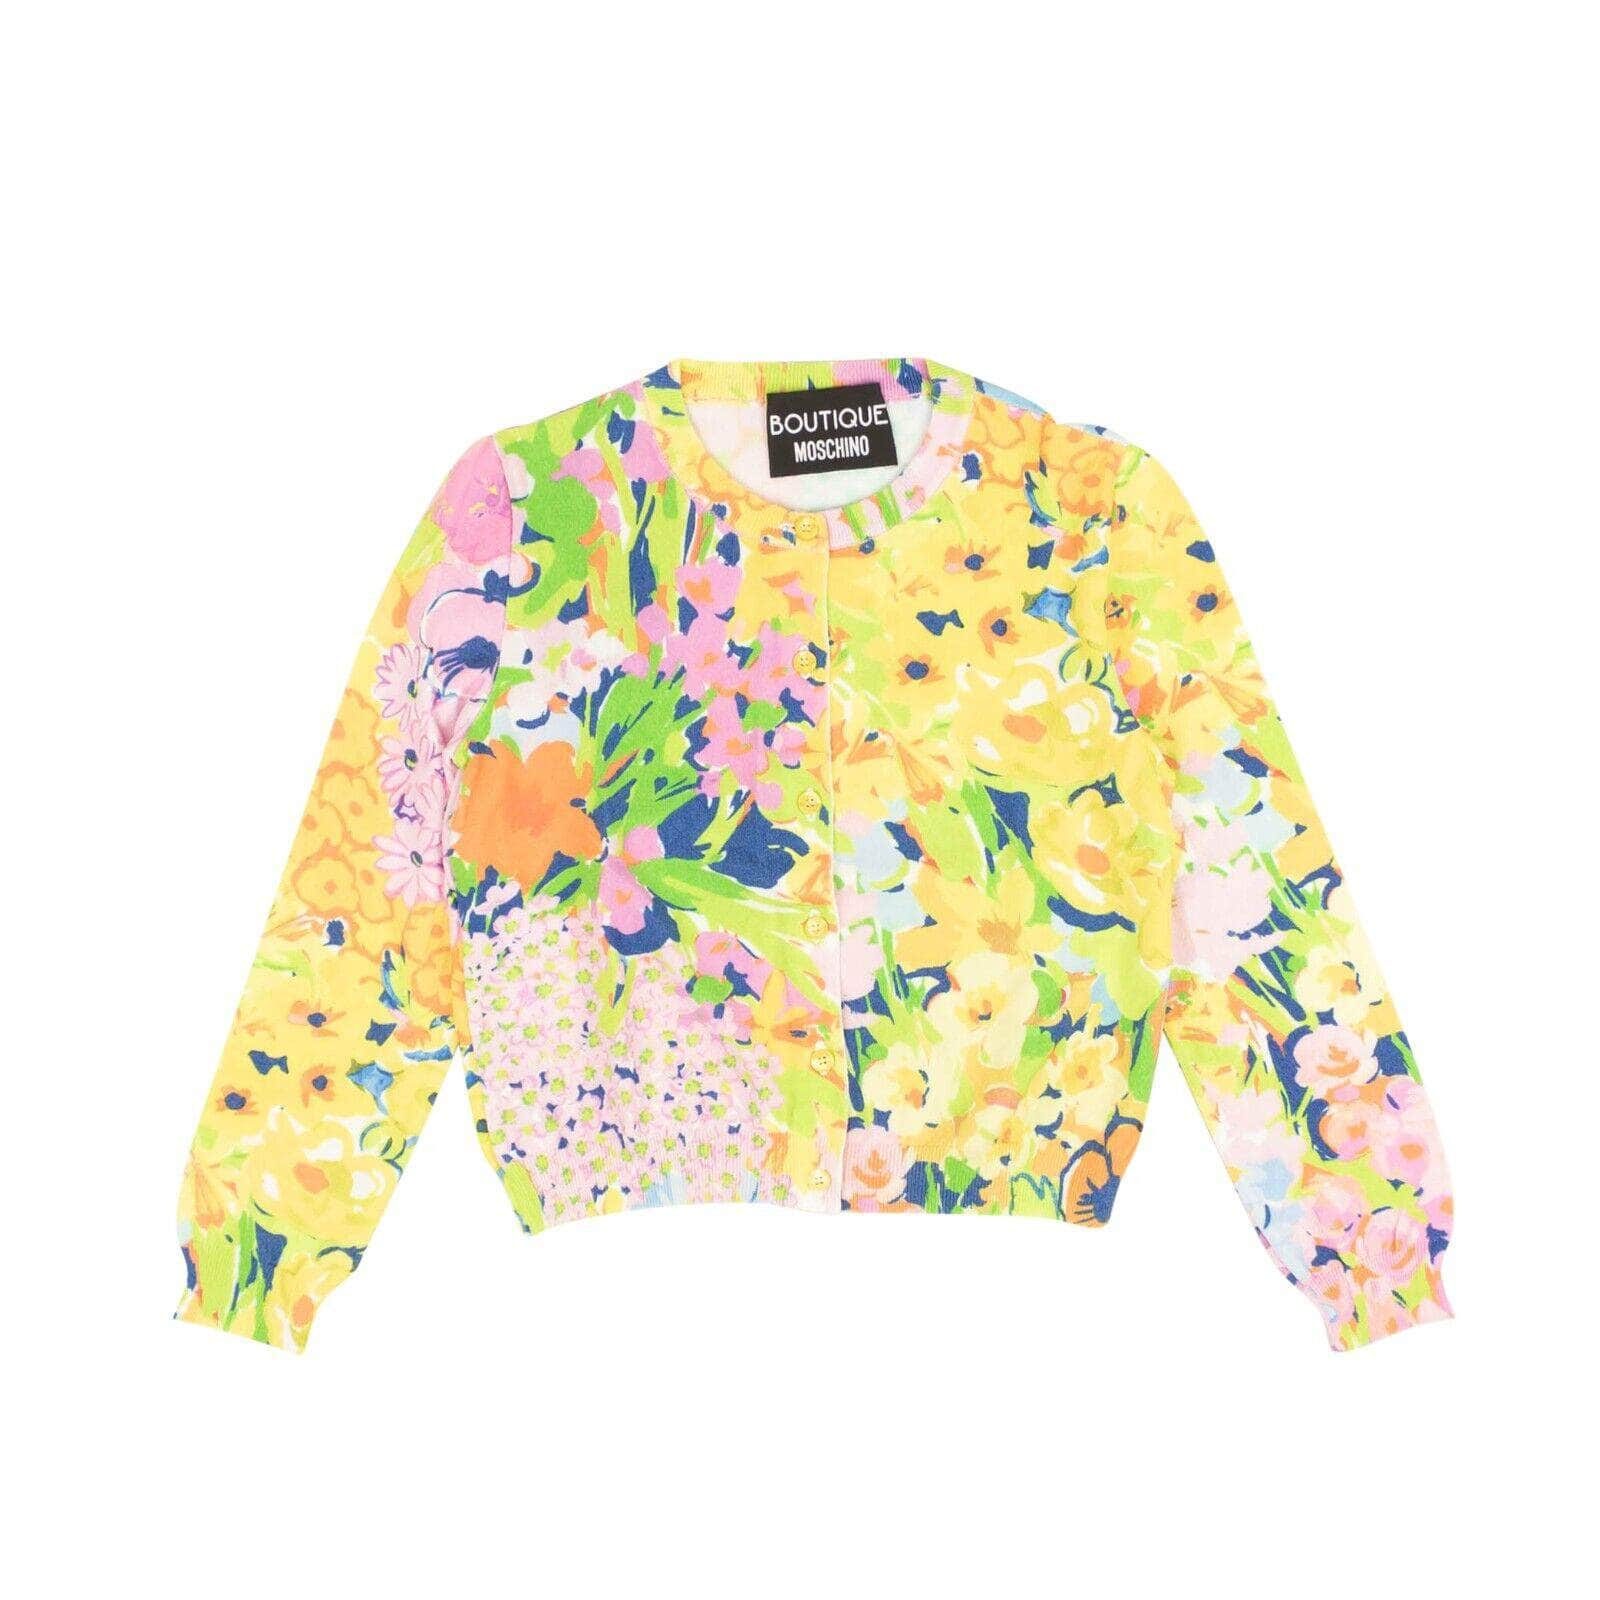 BOUTIQUE MOSCHINO boutique-moschino, channelenable-all, chicmi, couponcollection, gender-womens, main-clothing, size-36, size-38, size-40, under-250, womens-cardigans Multi Floral Print Cardigan